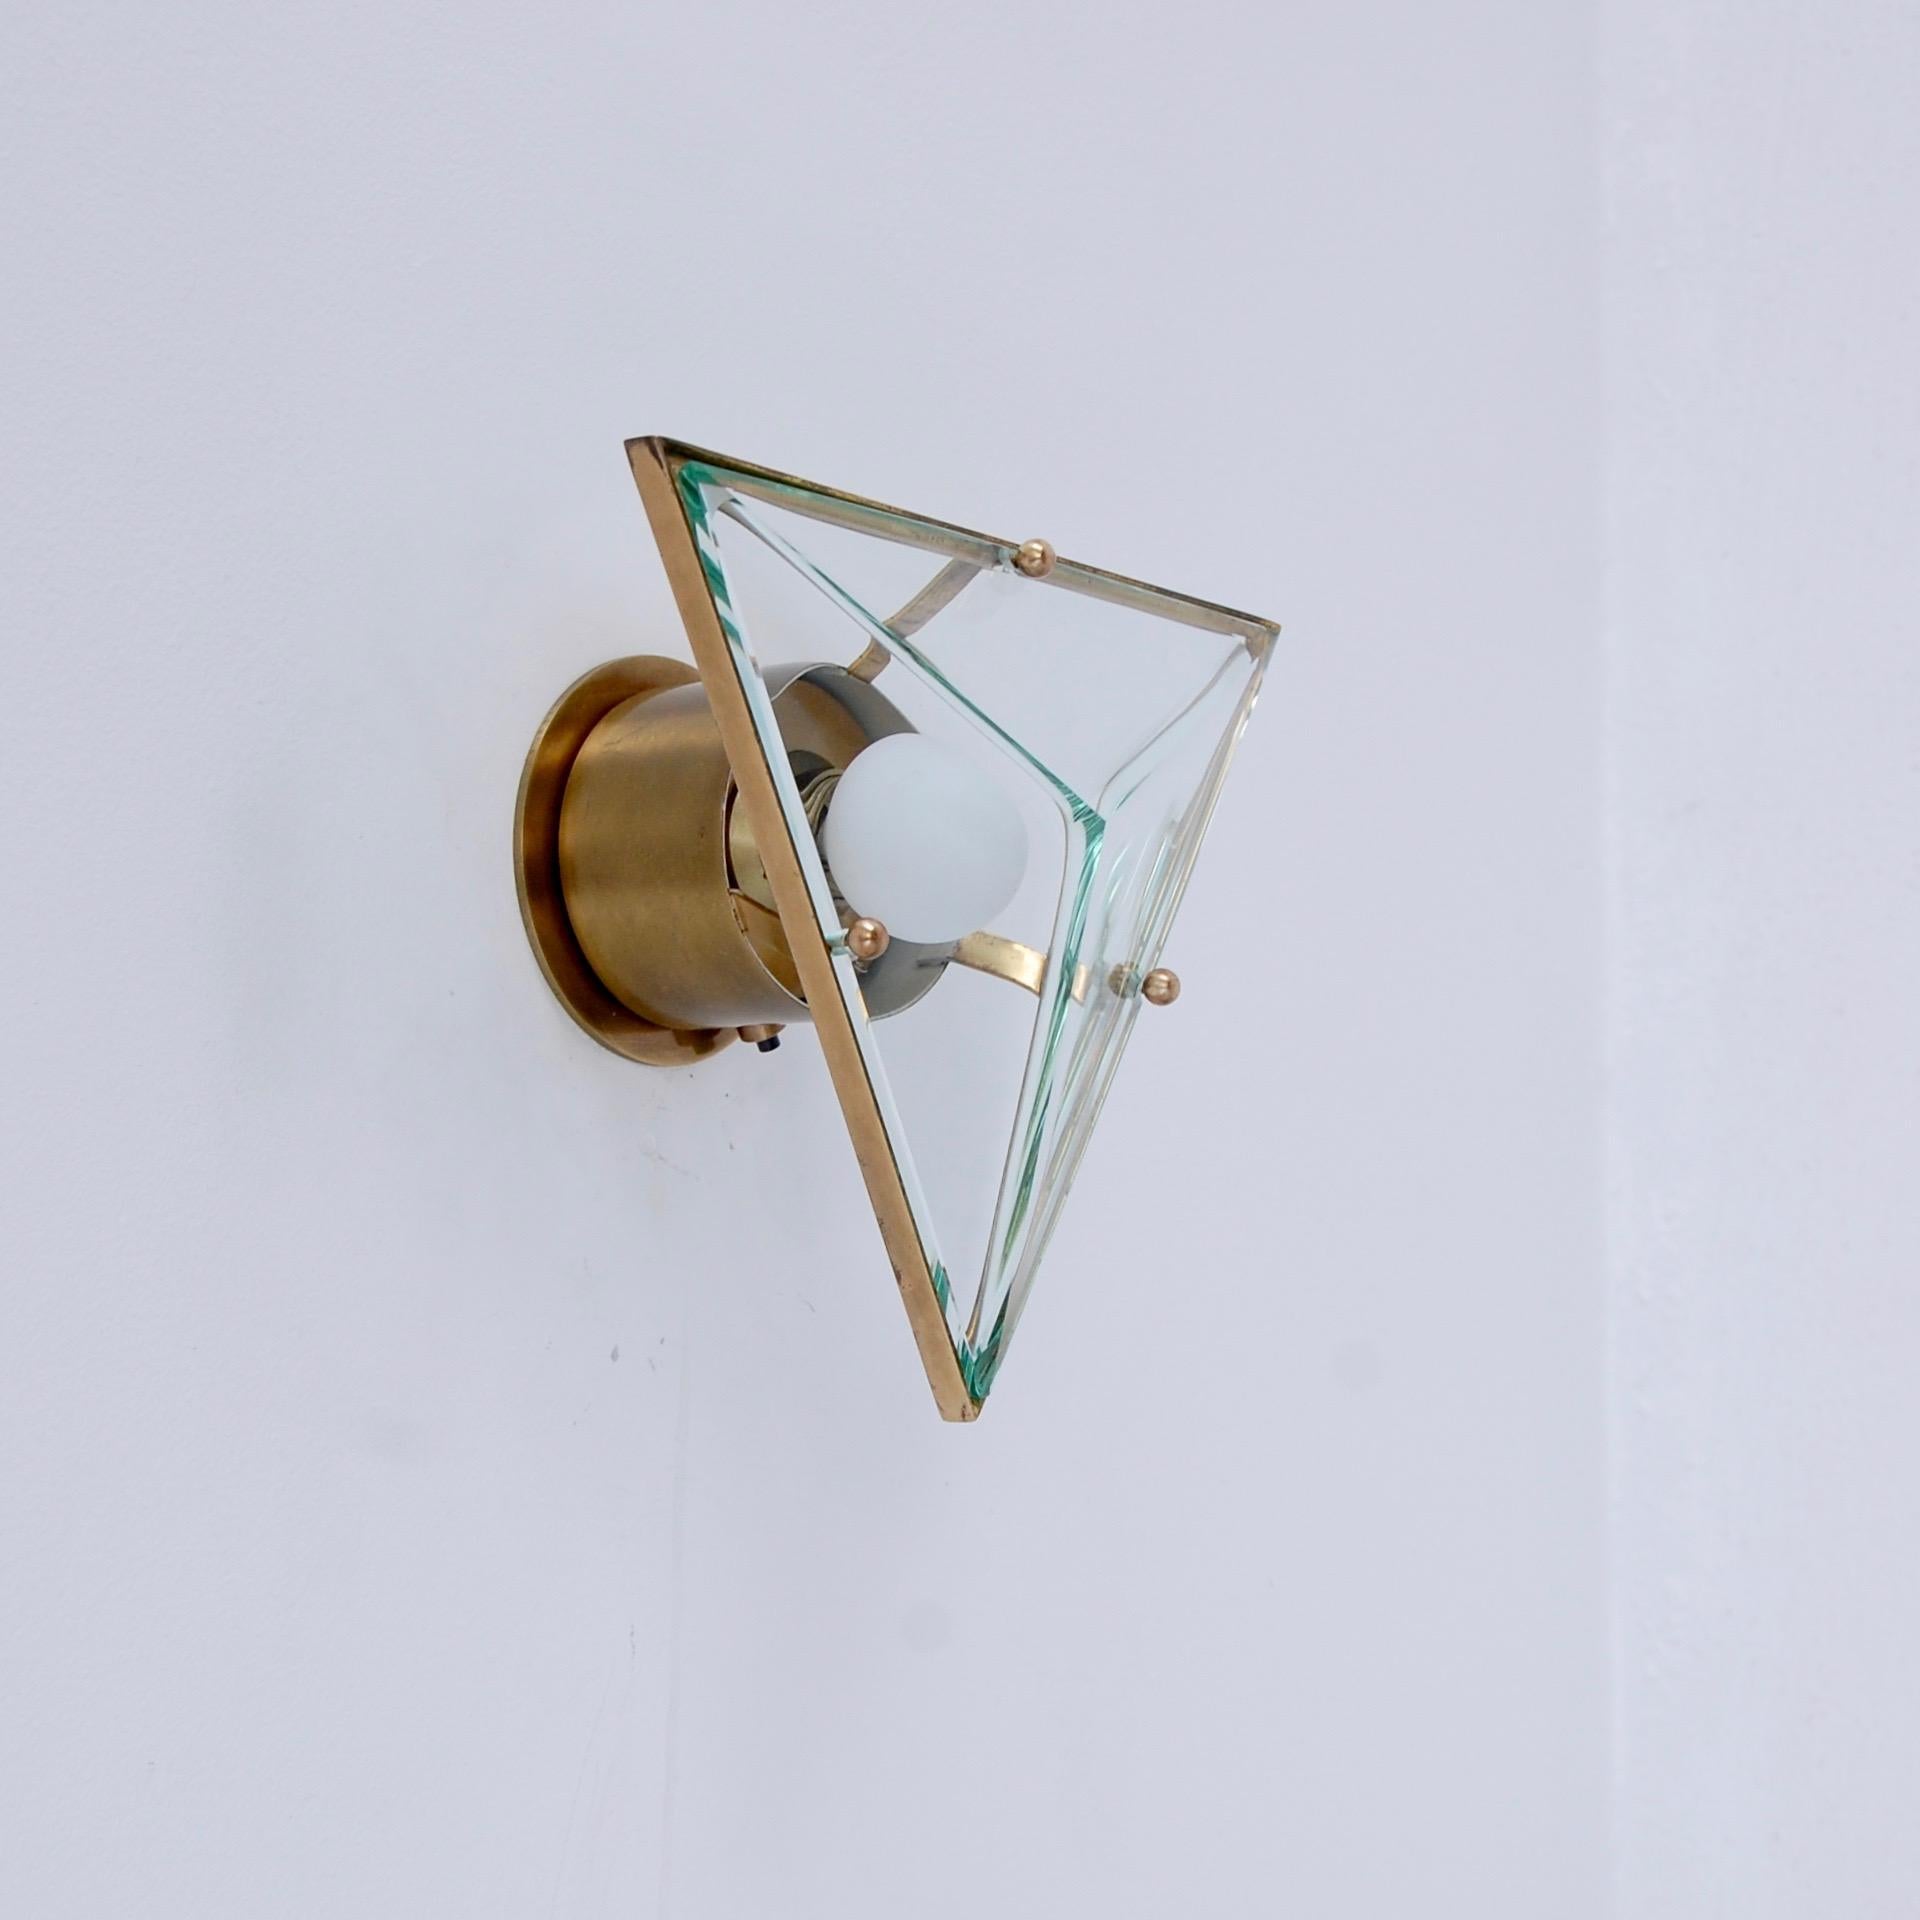 Pair of brass and glass triangular sconces by Crystal Arte from Italy. Partially restored, original patina brass finish, and glass. Single E12 based socket per sconce. Maximum wattage 75 watts per sconce. Back plate has 
2 ¾” center to center